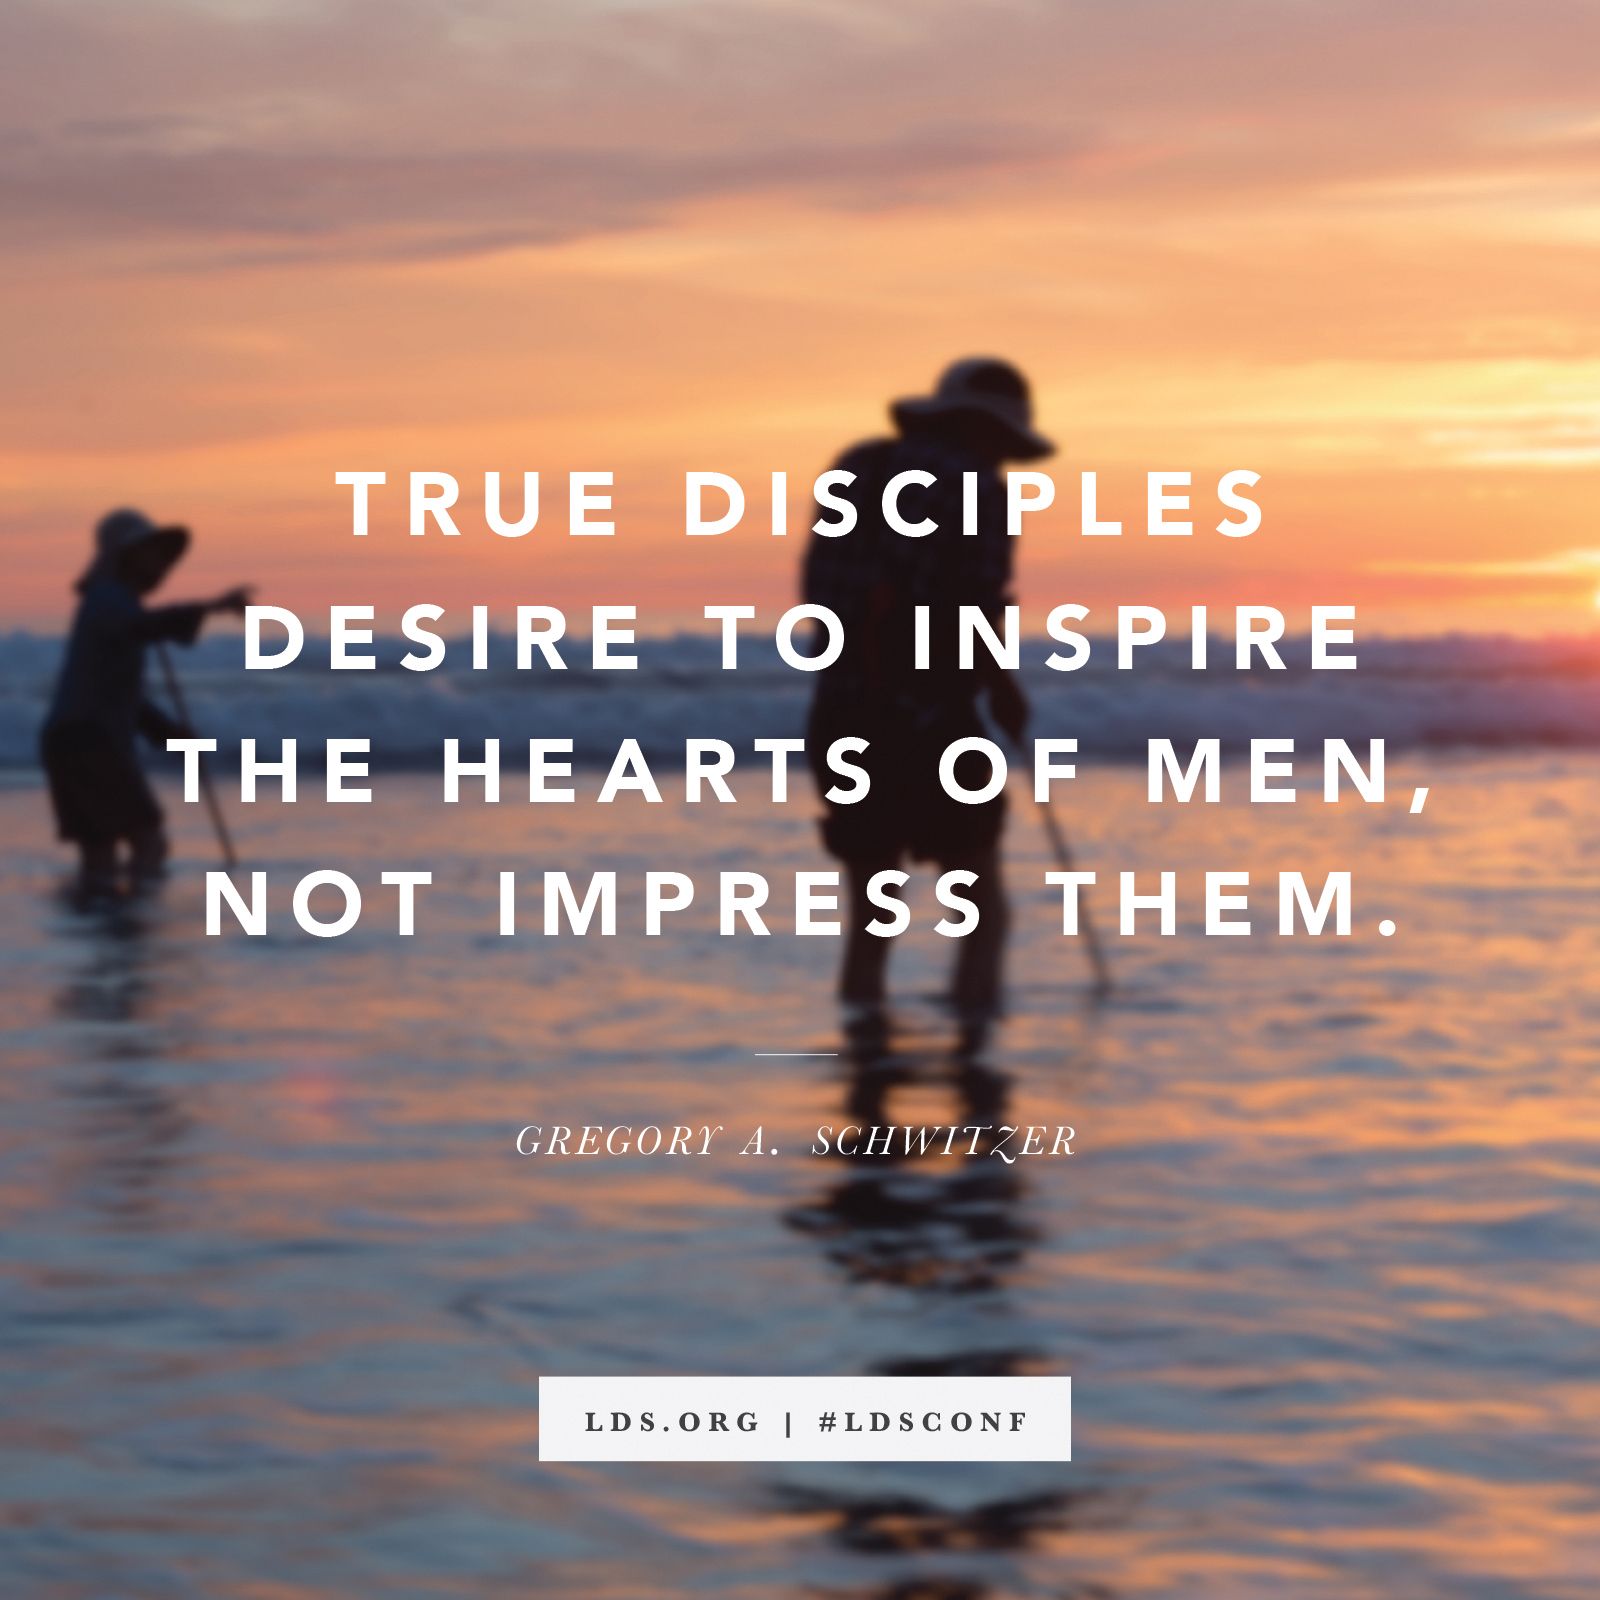 “True disciples desire to inspire the hearts of men, not just impress them.” —Elder Gregory A. Schwitzer, “Let the Clarion Trumpet Sound”